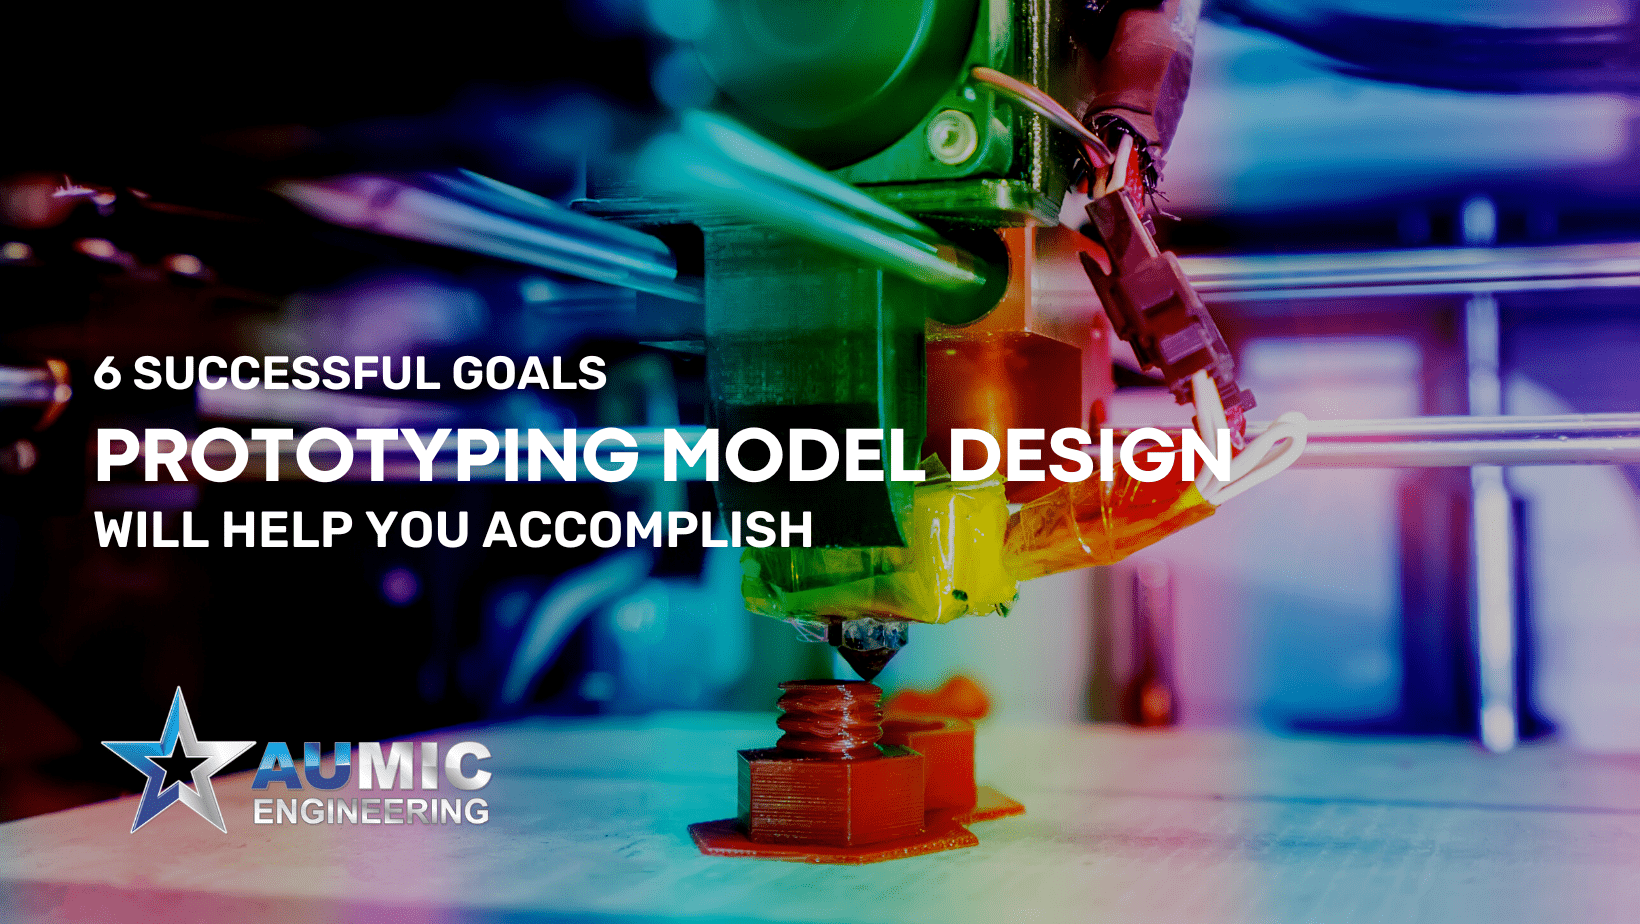 6 goals of prototyping model design with Aumic Engineering